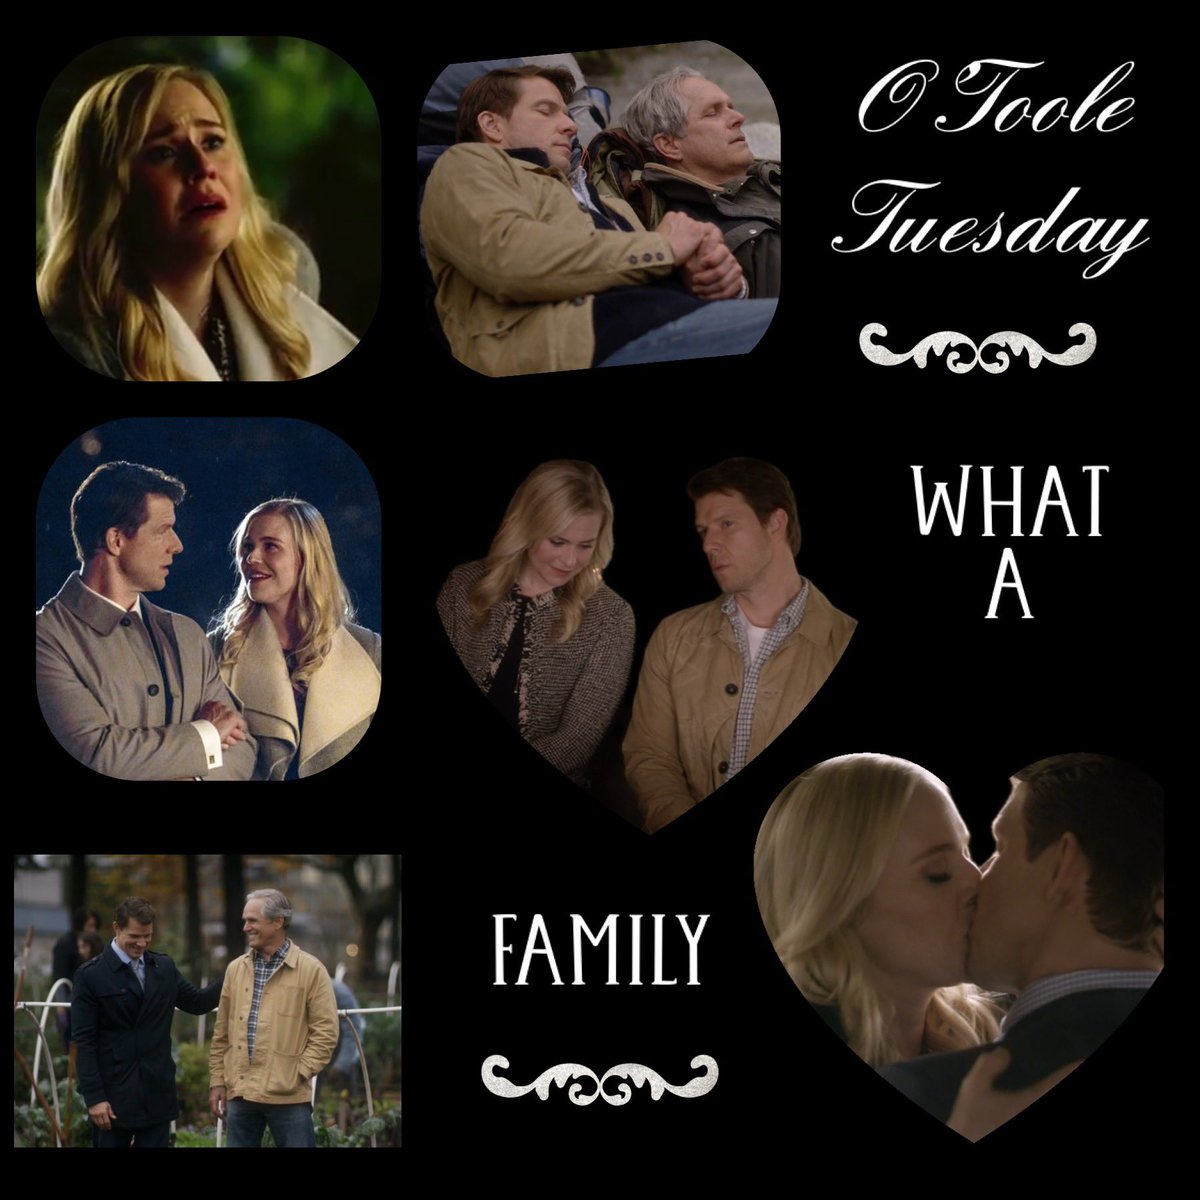 There’s giving, taking, learning, trusting, understanding, forgiving & loving in #LostWithoutYou #HigherGround 
Oliver & Shane /Oliver & his dad. Without any of it we would have no #OTooleTuesday 
Please #RenewSSD so we can  see more of the O’Toole’s
#LisaHamiltonDaly #POstables